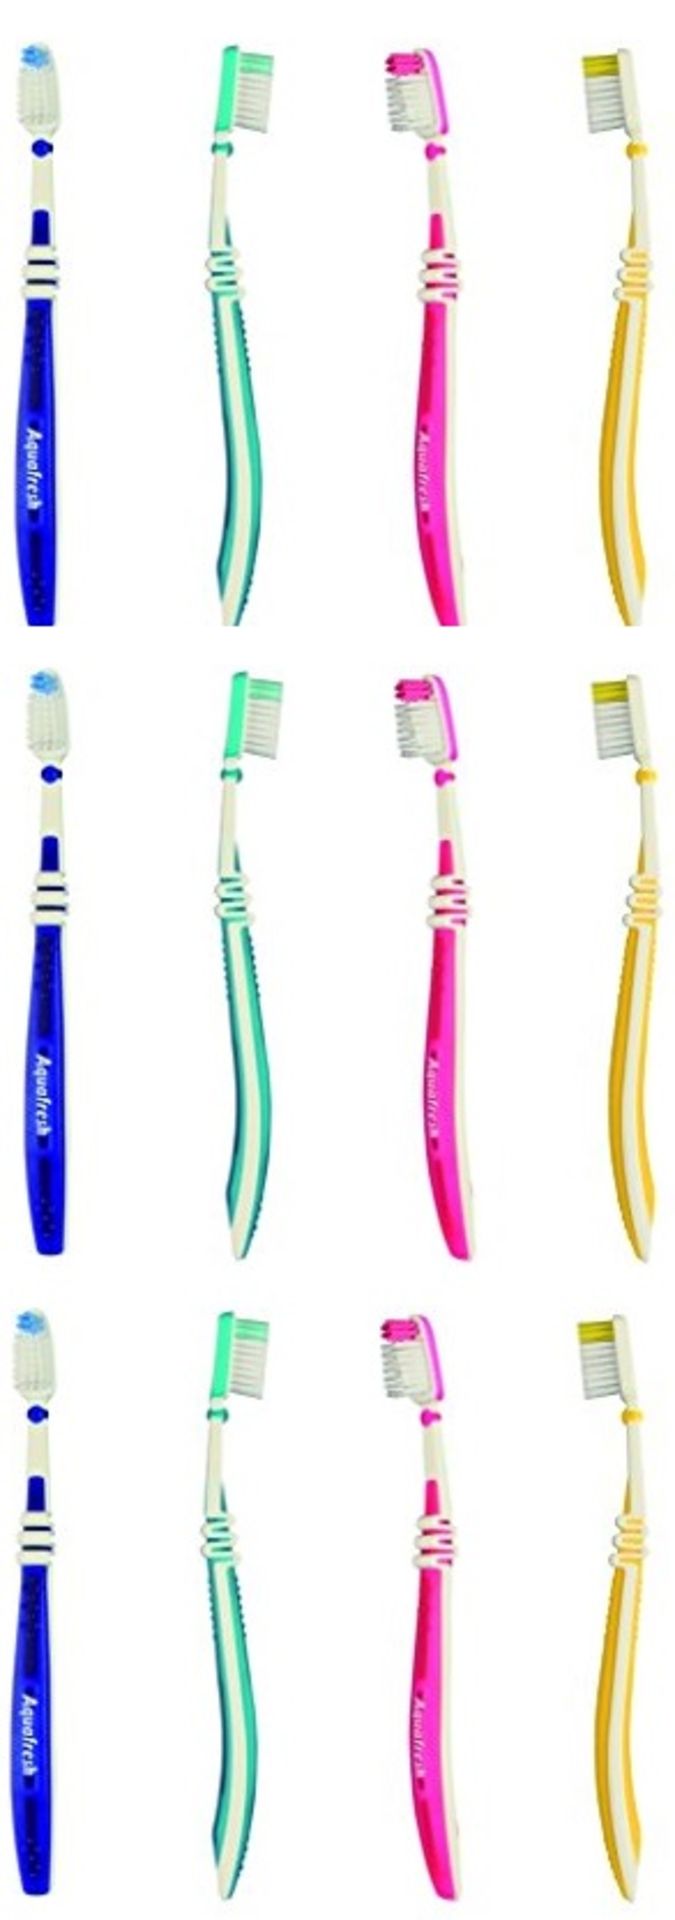 V Brand New 12 x Aquafresh Activate Triple Protection Toothbrush Firm Clean - Image 4 of 6